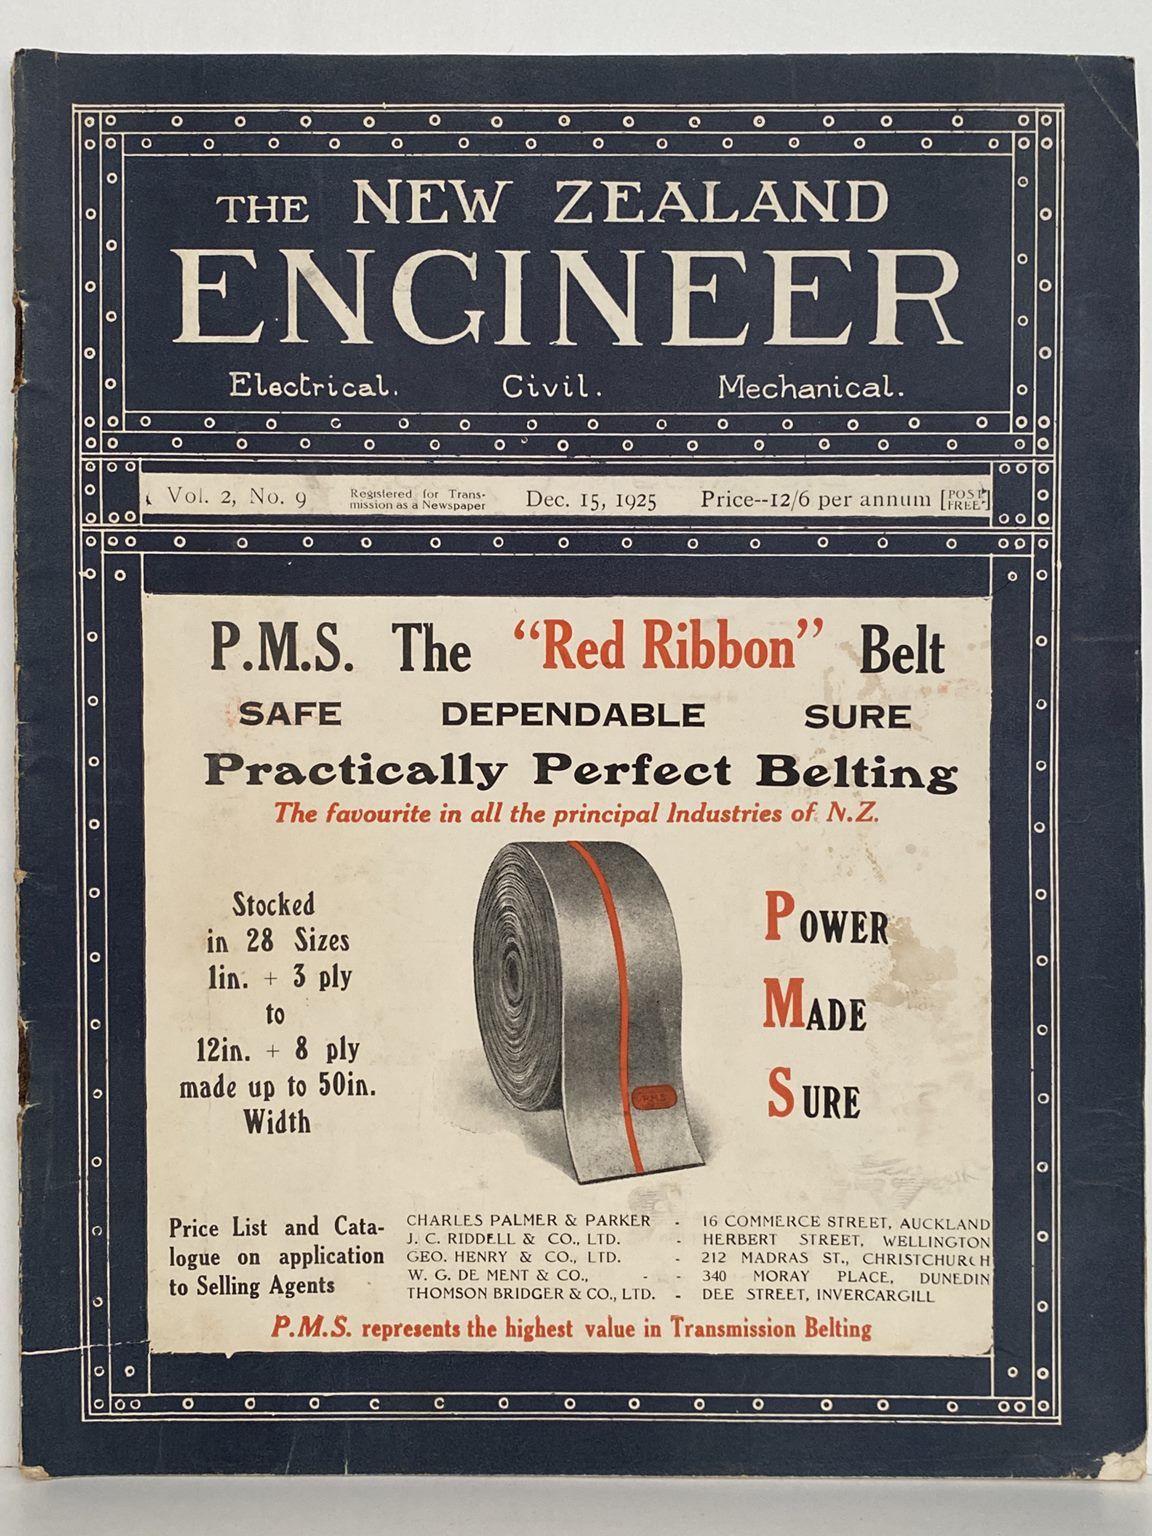 OLD MAGAZINE: The New Zealand Engineer Vol. 2, No. 9 - 15 December 1925